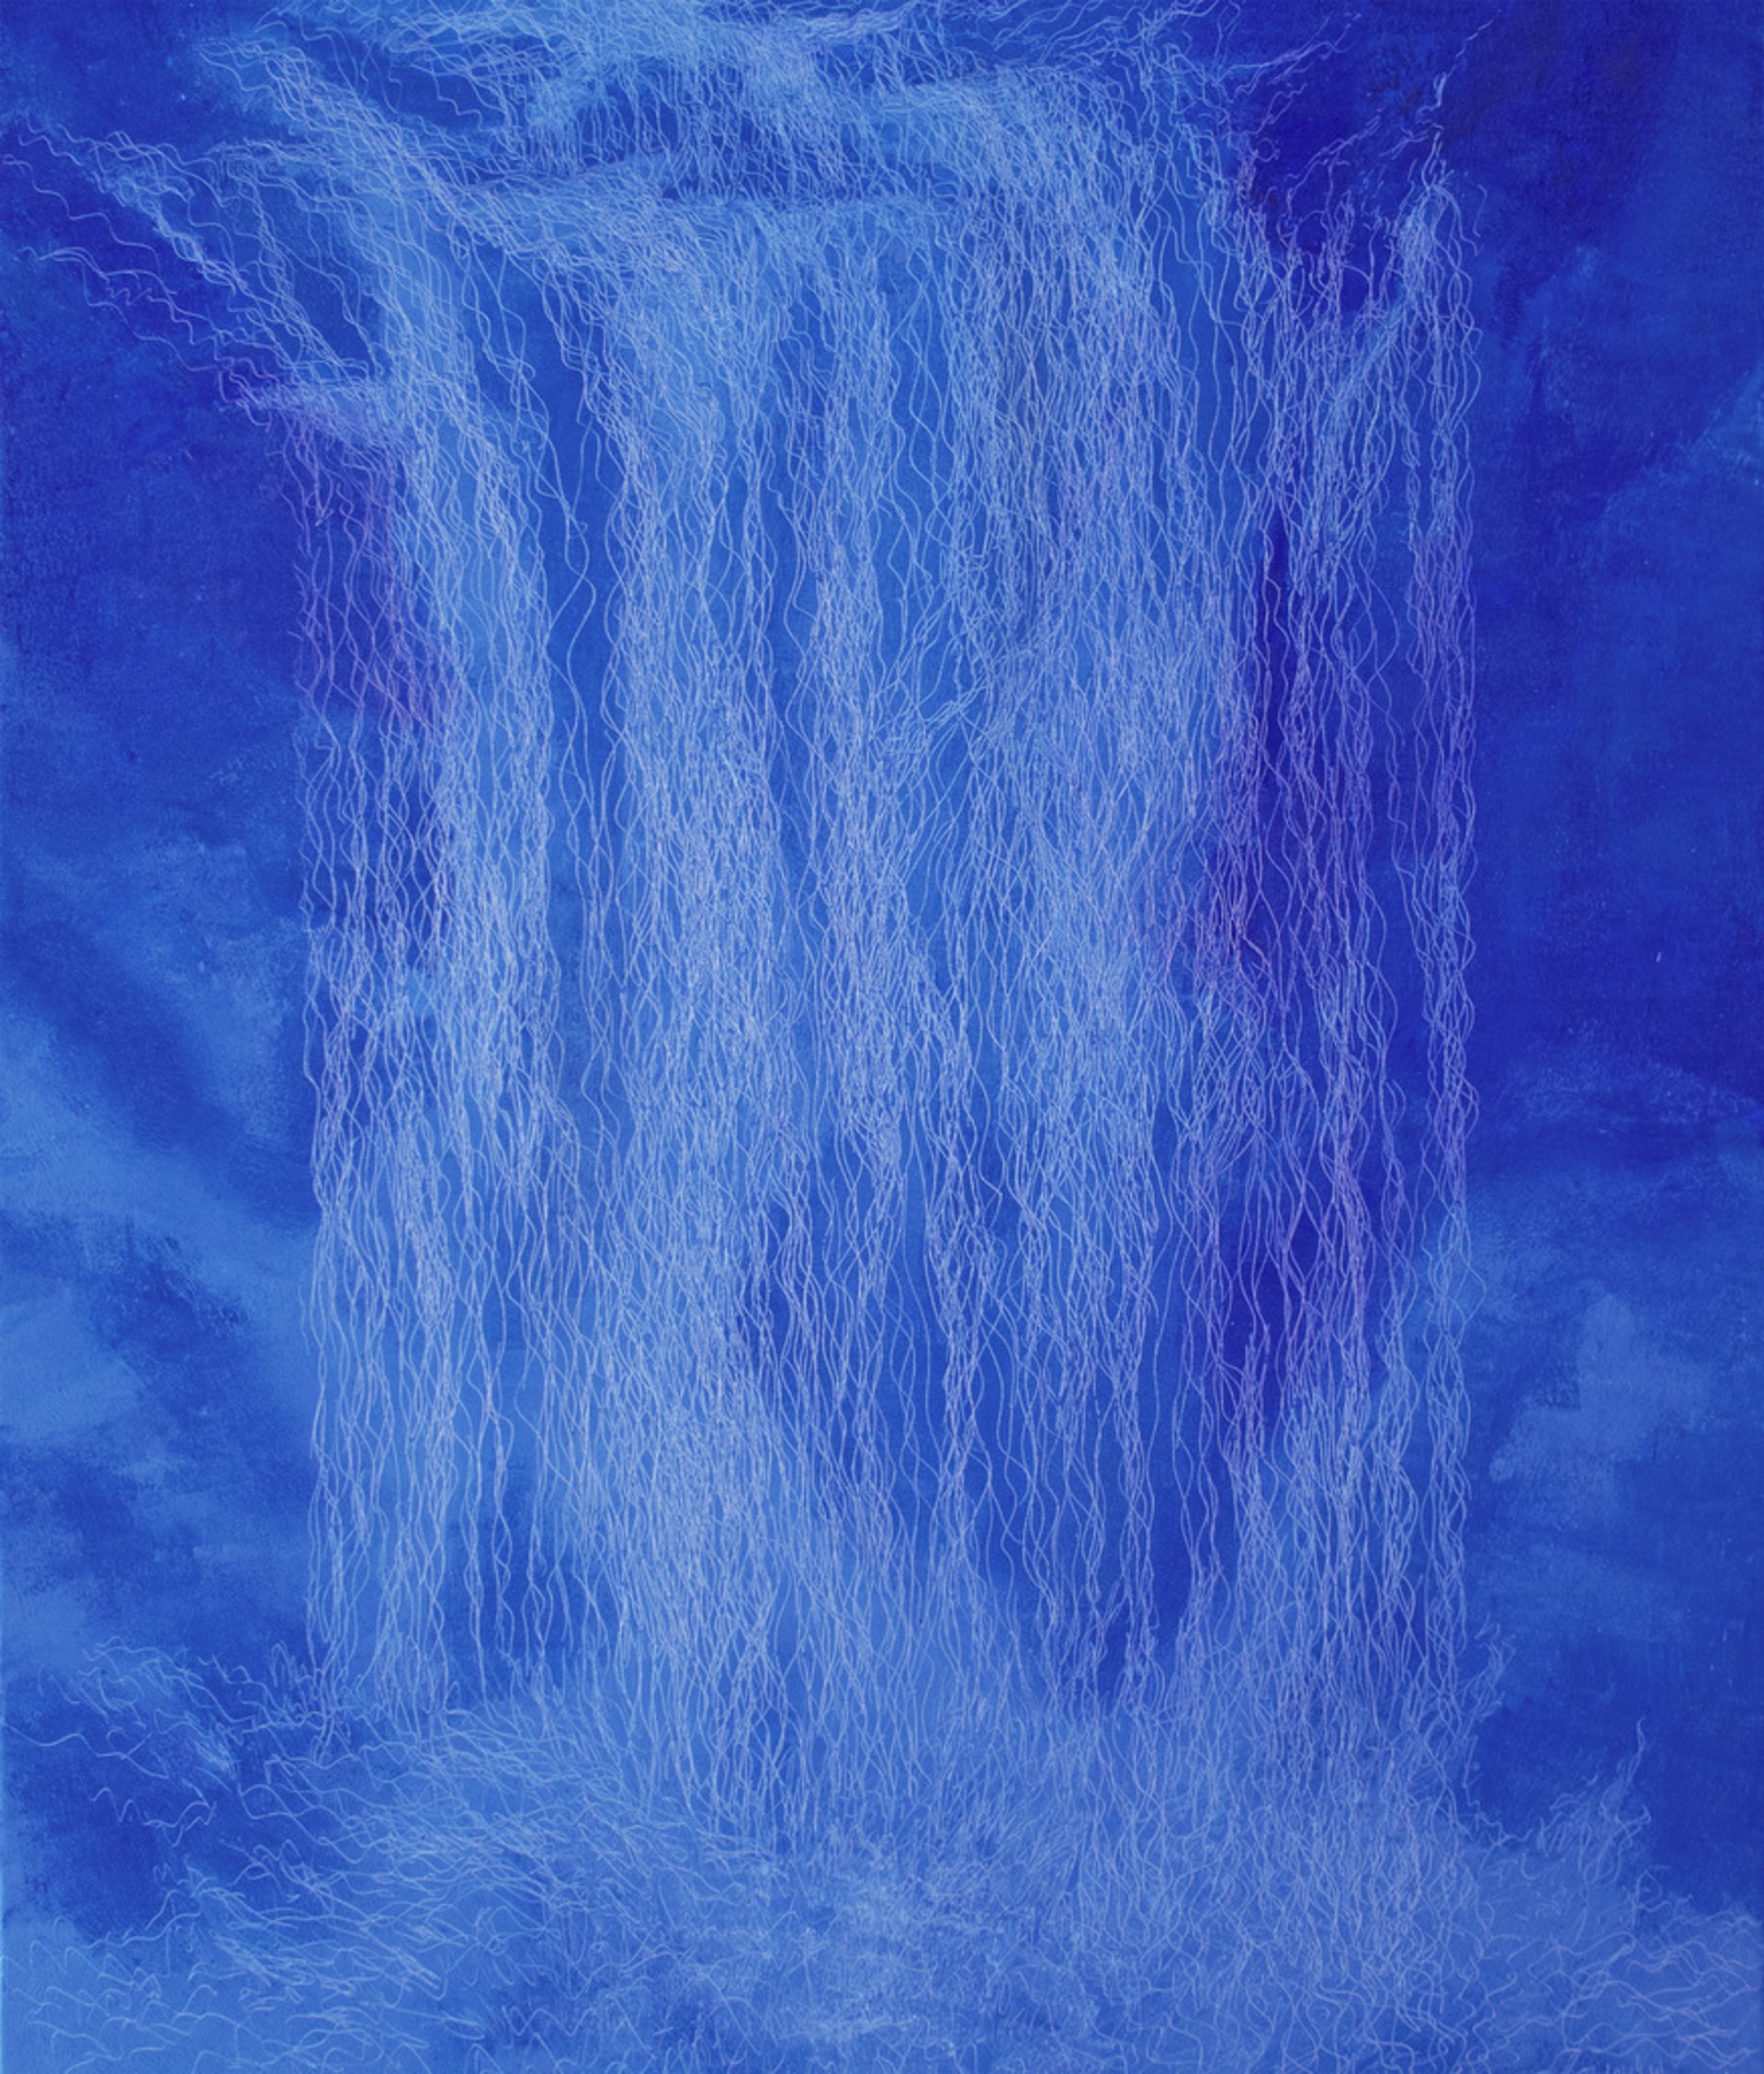 Waterfall VI by Leigh Wen